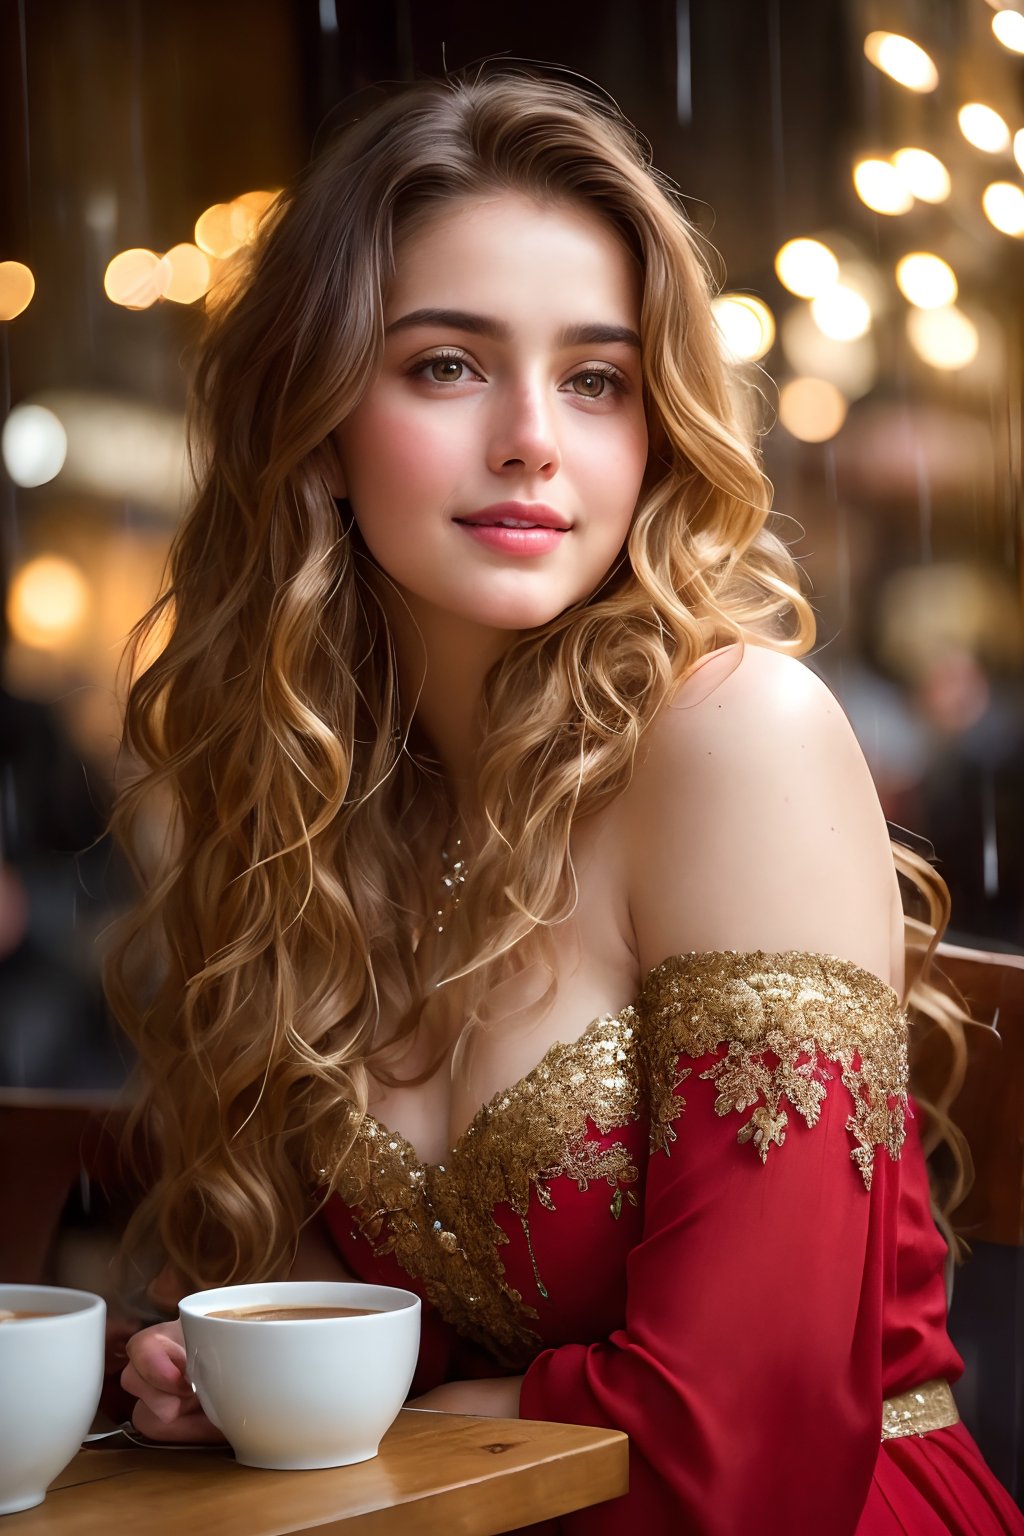 (((full body view:1.2))), stunningly beautiful "kashmiri" (((extremely innocent face ))), wild hair, ((best quality)), ((masterpiece)), (detailed), ana de armas, highly detailed HDR photo, 8k quality, best quality, high resolution ultra photorealistic, high definition, highly detailed photo, photon mapping, dynamic angle, professional lighting, highly detailed face and body,expressive eyes, perfectly detailed face, smile, gorgeous face, real skin details, soft skin, looking at viewer, raw, photorealistic, real, perfect skin, real skin, realistic photo of a mid body shot, , extremely innocent face, very beautiful, cheerful, laughing, clever naughty smile, , she is wearing a loose red color gown, she smile like gentle love goddess, very long tresses, golden hair, brown hair, expressive face, divine eyes,, Wide-angle view of a pretty fashion model looking at the camera, expressing a complaint as if it's our fault, sad and thoughtful, sipping coffee in a dark, cozy coffee shop with rain outside, vibrant ambience, lively atmosphere, adorned with fairy lights and candles, captured in photorealistic detail with real skin textures, soft lighting, and presented as an absurdres masterpiece.